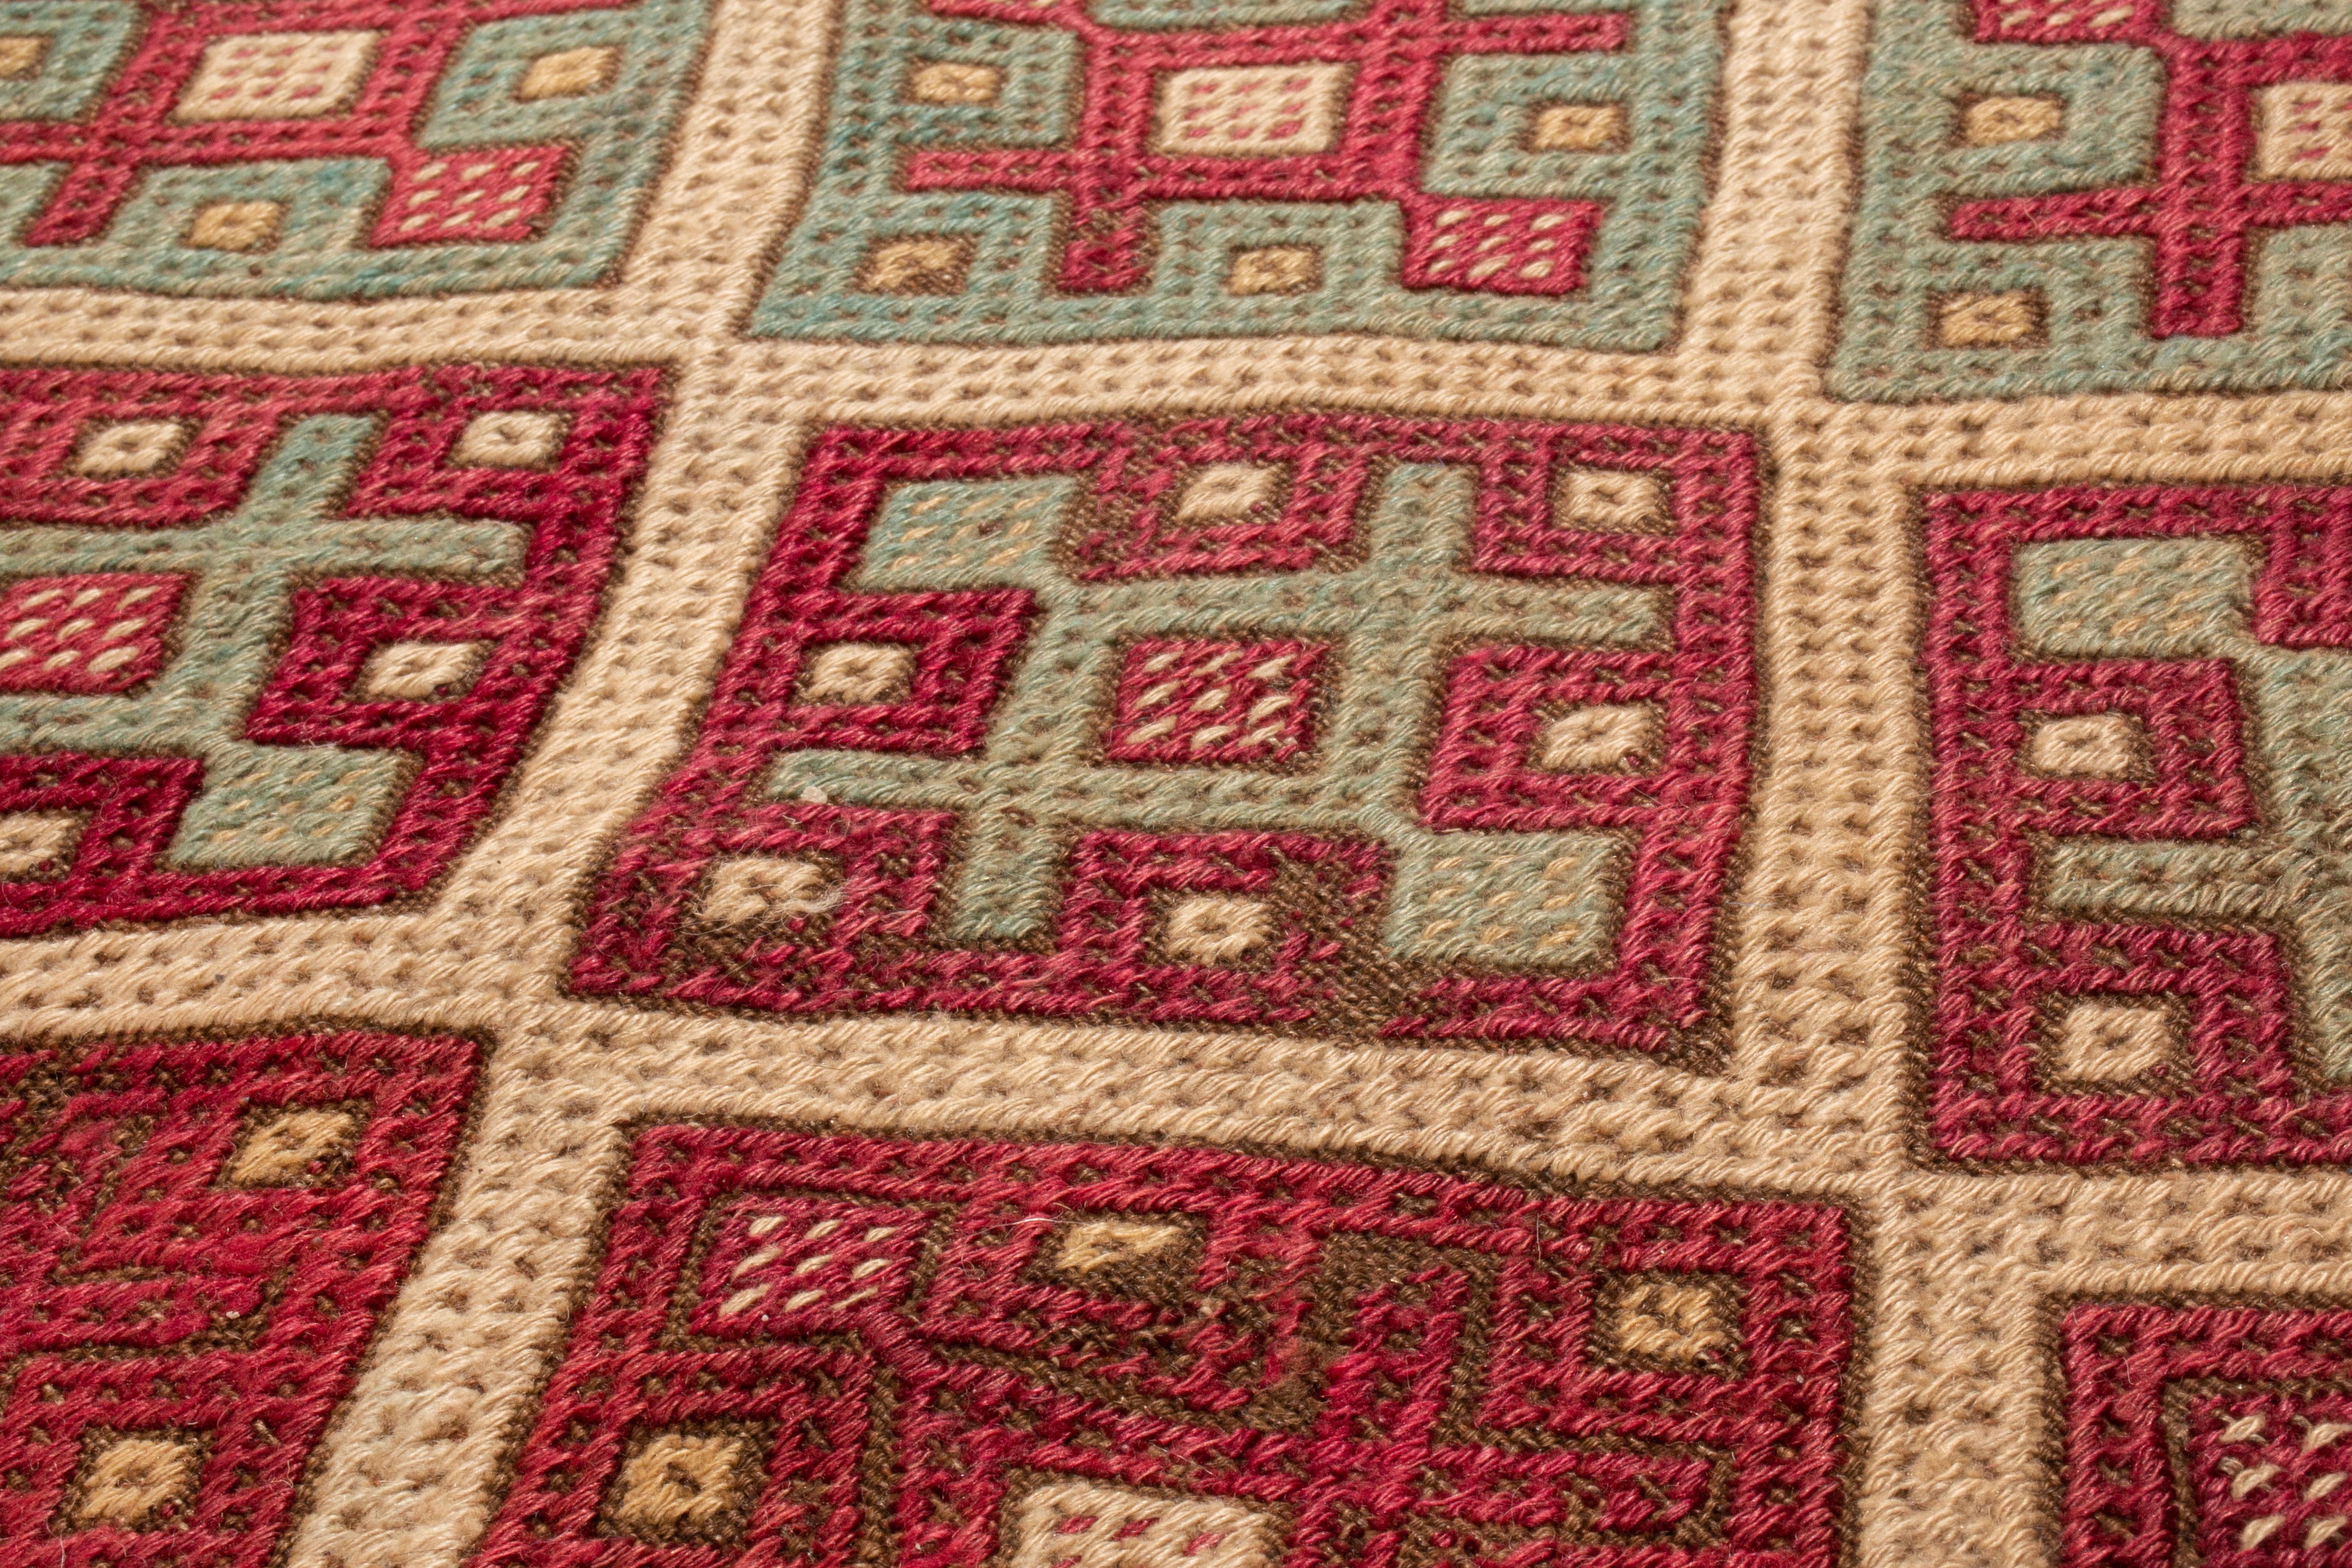 Antique Turkish Transitional Red and Blue Wool Kilim by Rug & Kilim In Good Condition For Sale In Long Island City, NY